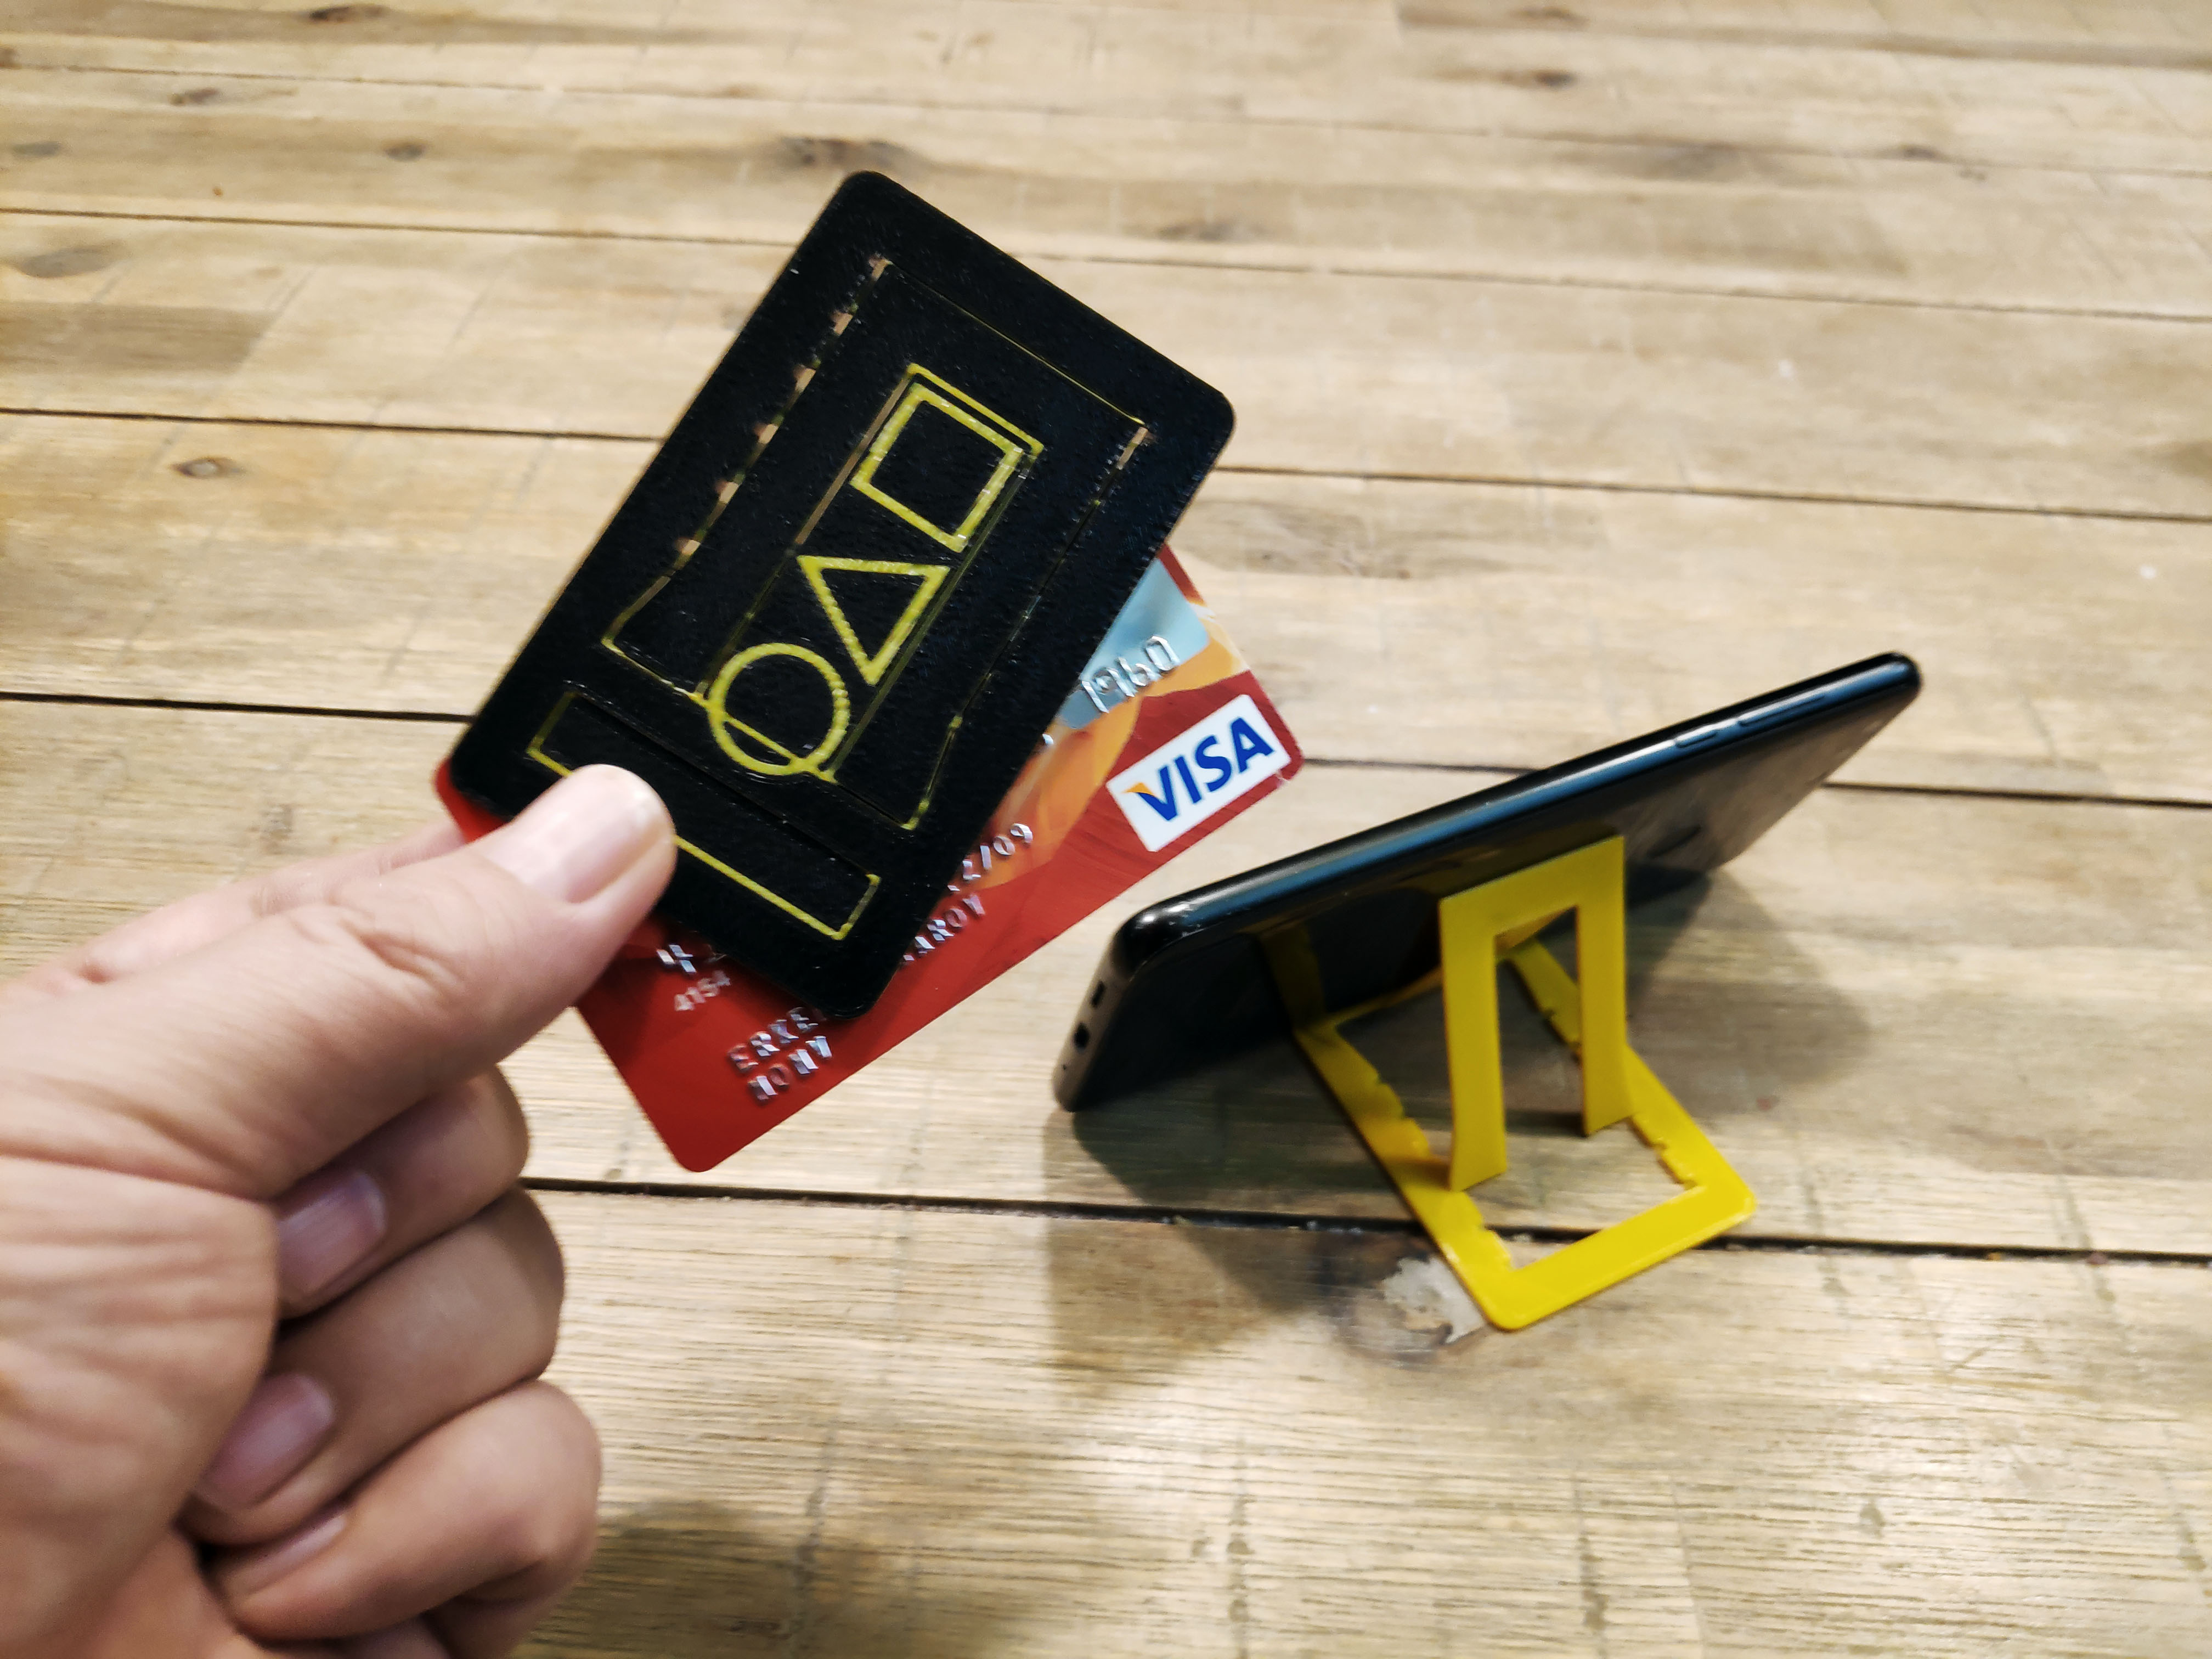 Ultra-thin (1.5mm) credit card-sized phone stand